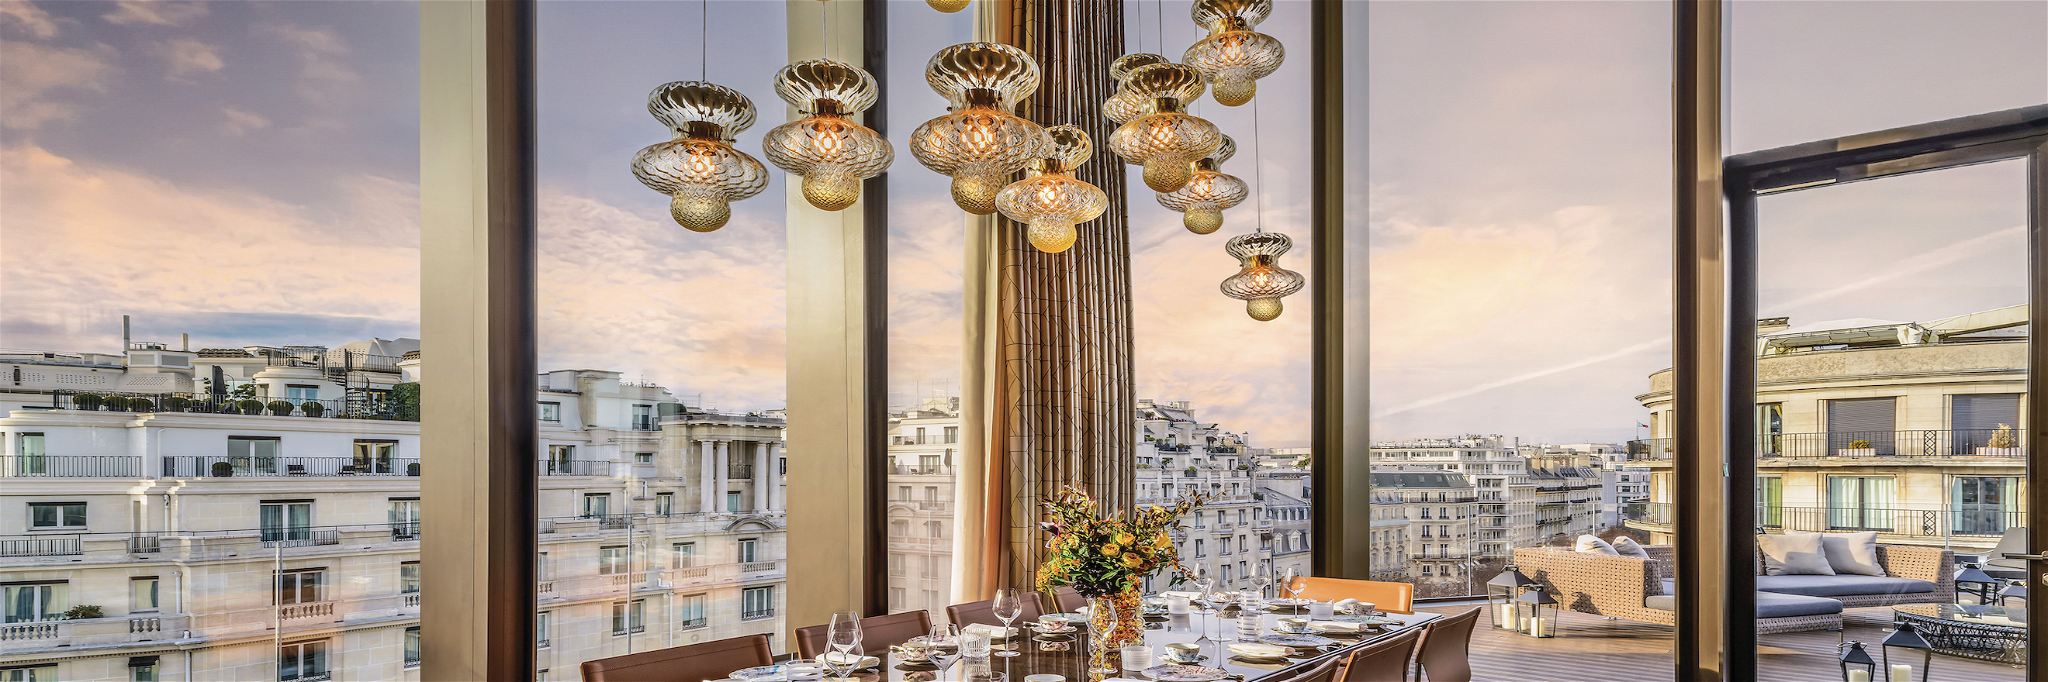 The penthouse at the new Bvlgari Hotel Paris